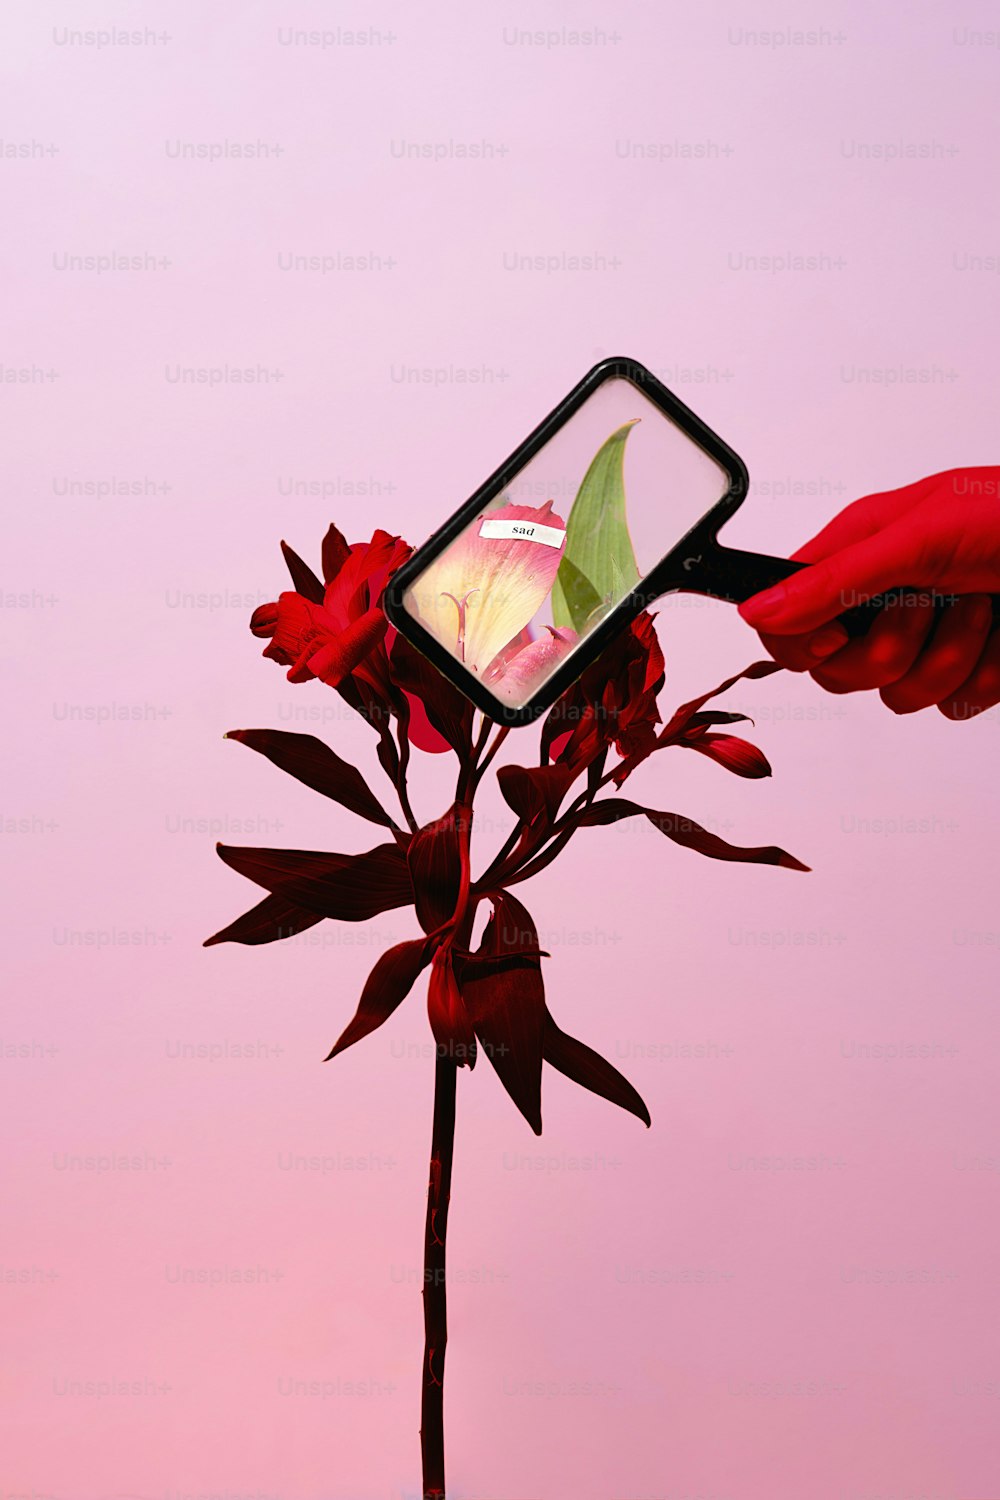 a person holding a cell phone up to a flower